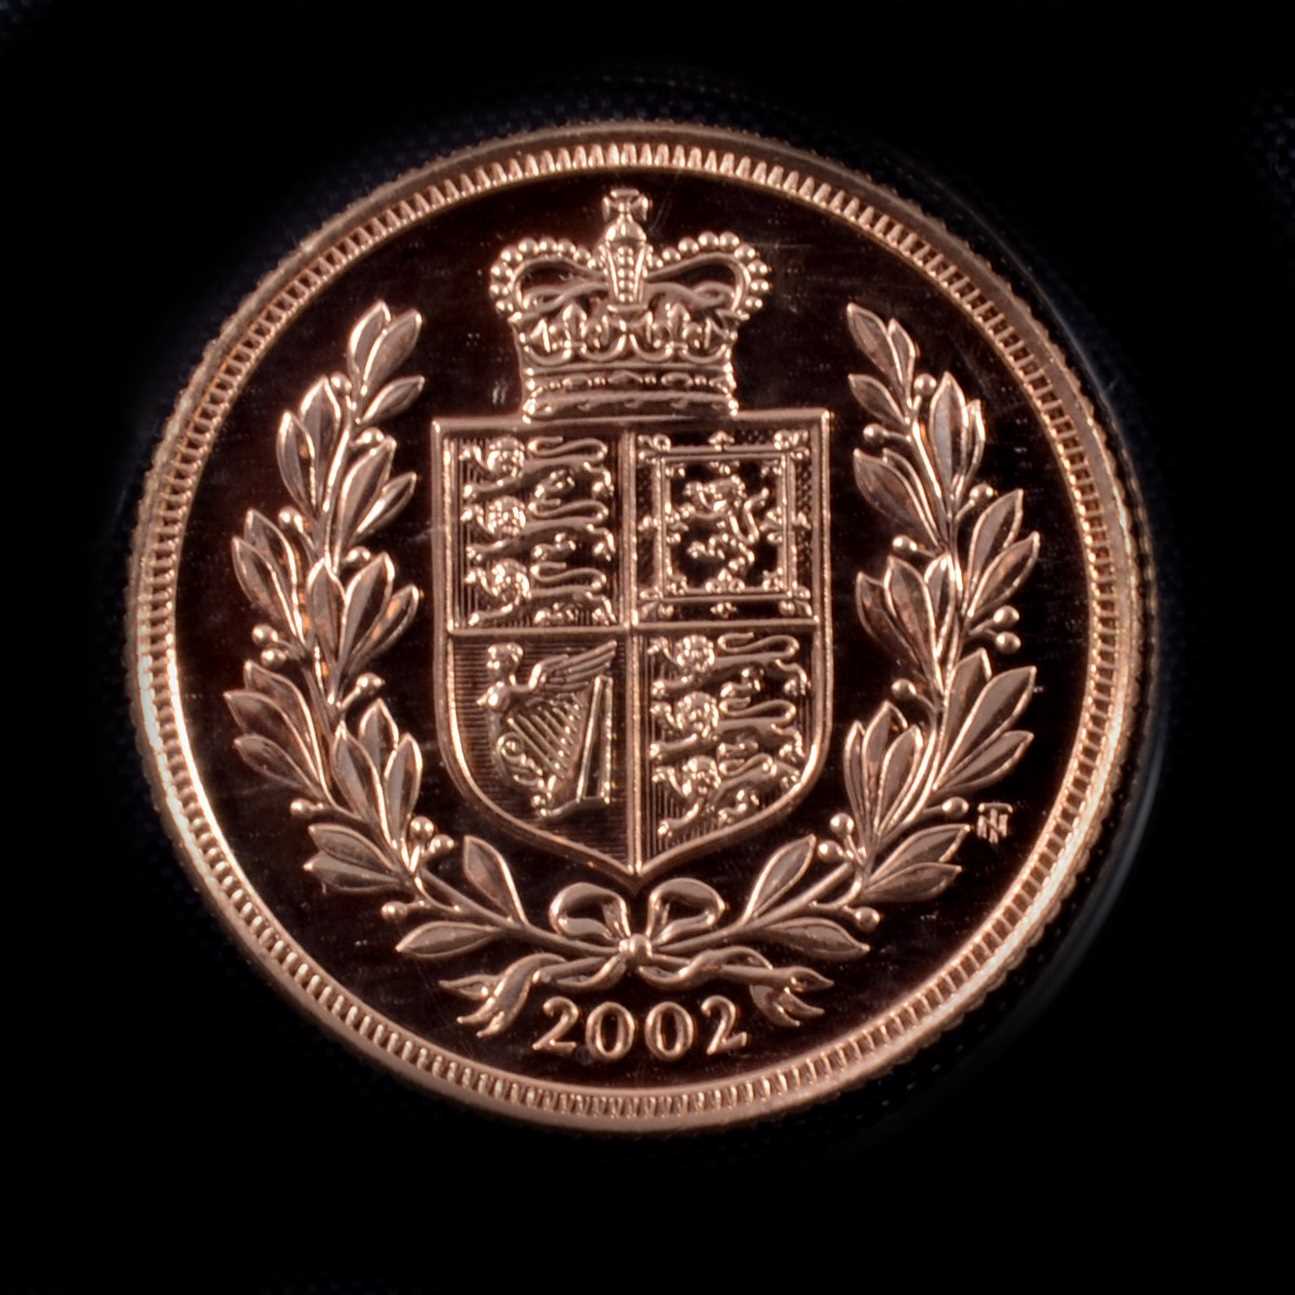 A Gold Full Sovereign coin, Elizabeth II 2002, Special Golden Jubilee Edition - Image 2 of 2